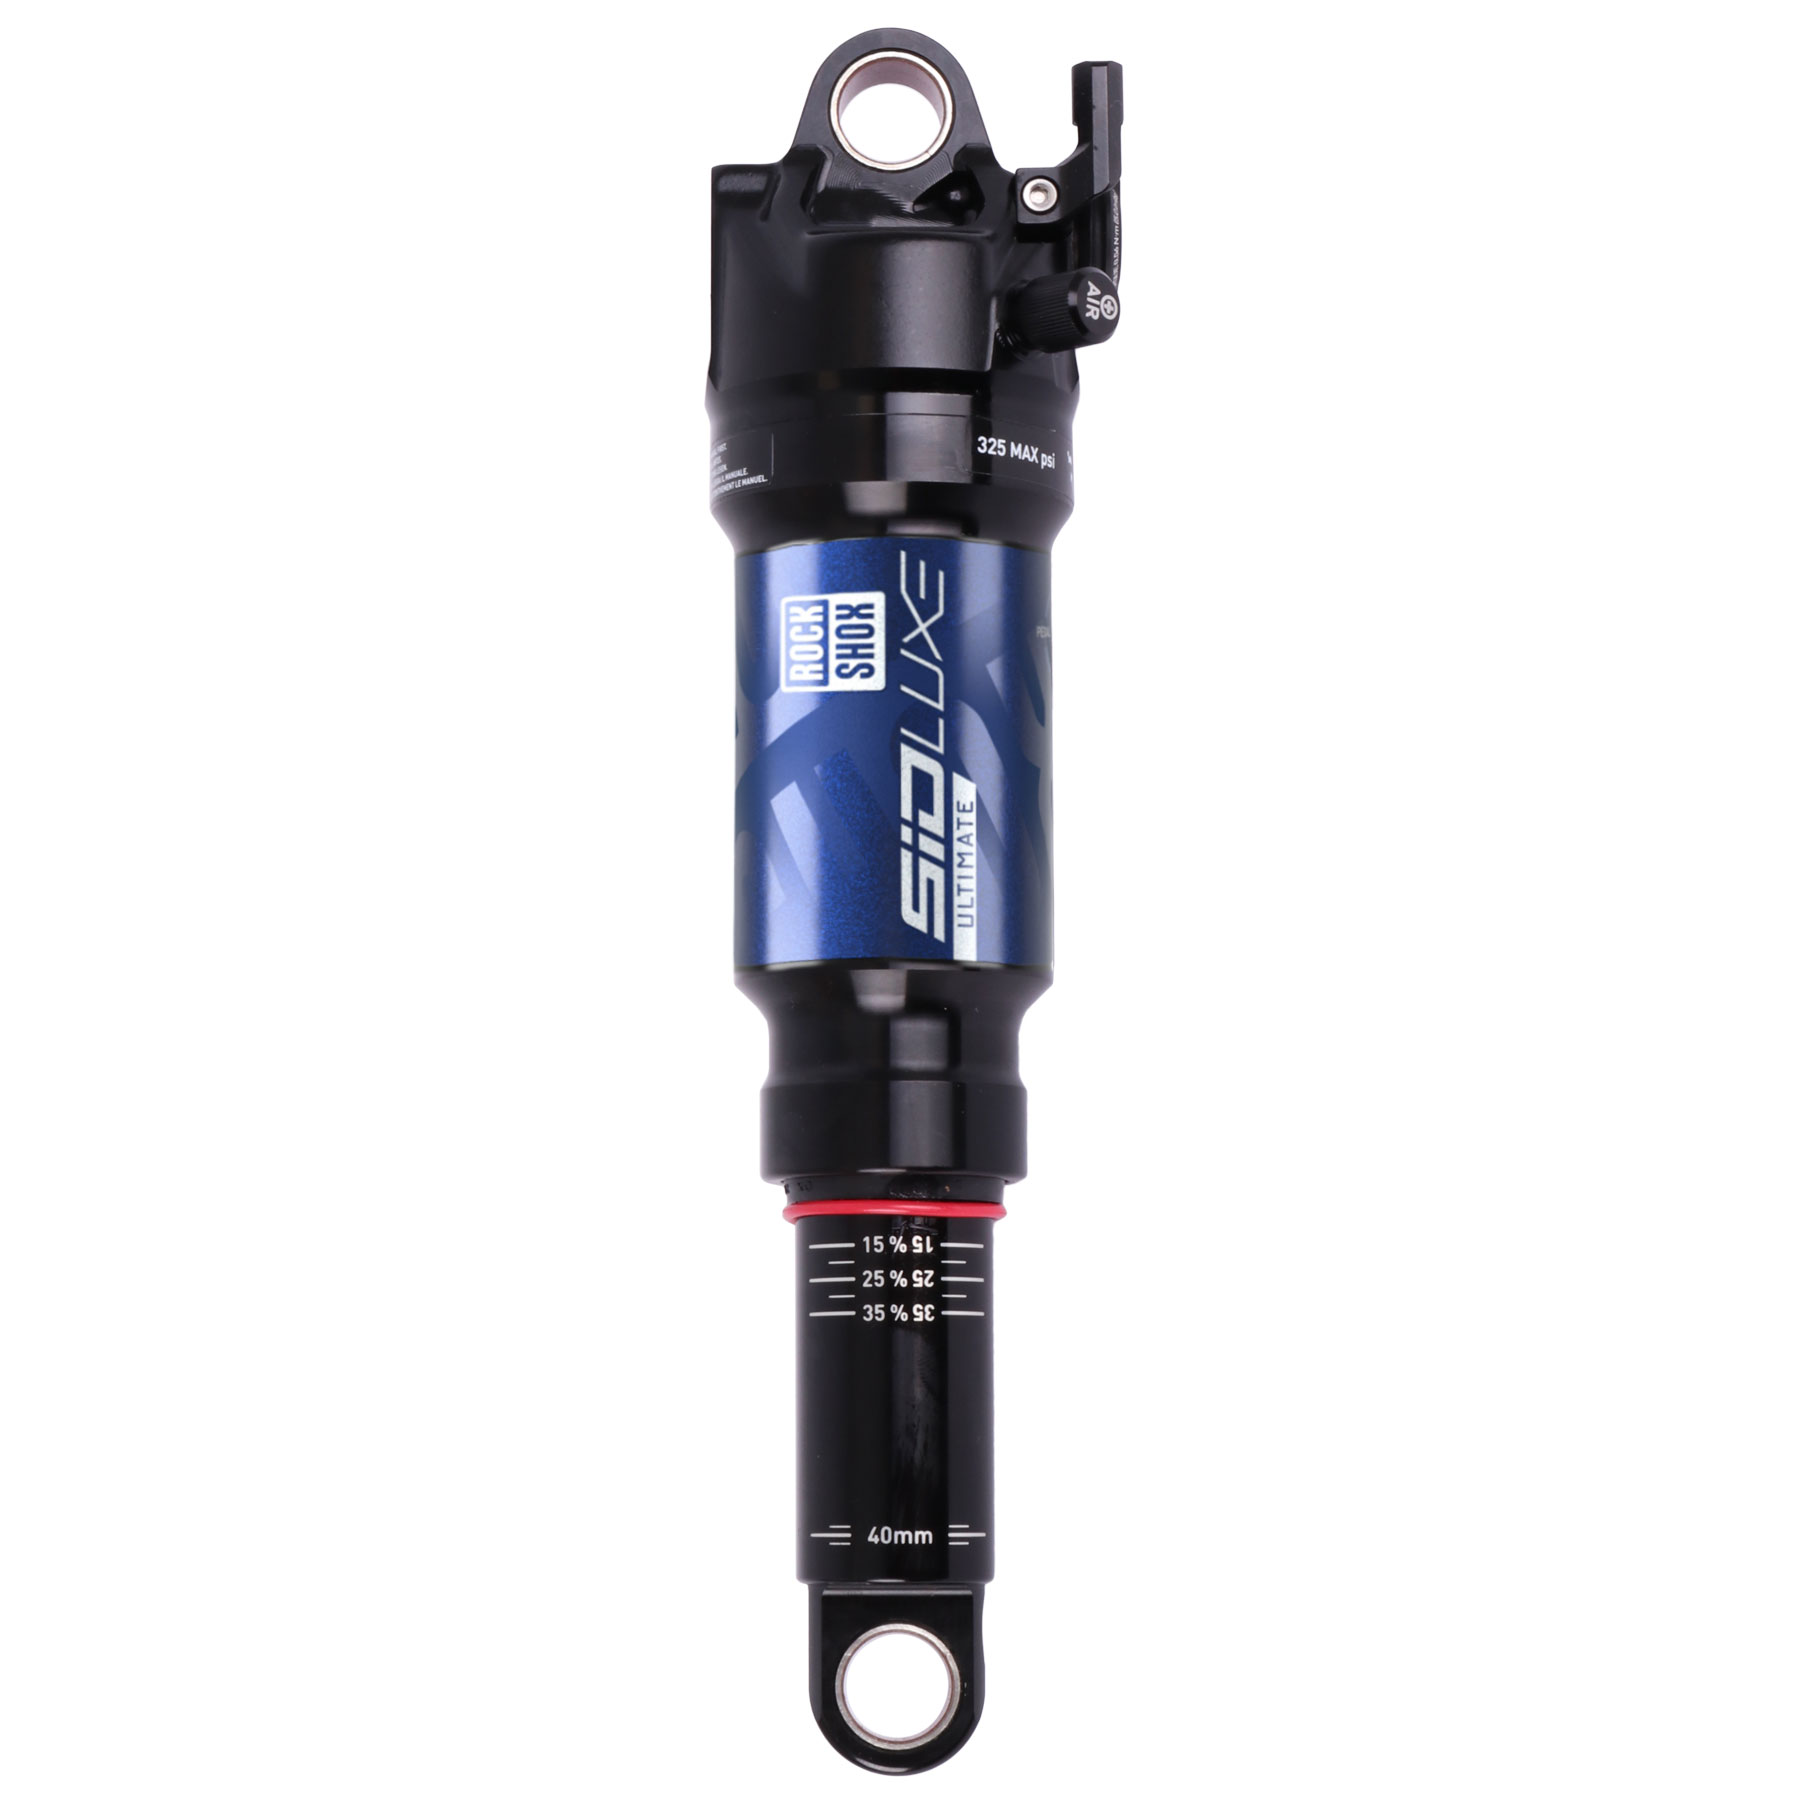 RockShox SIDLuxe Ultimate 2P Rear Shock - SoloAir, RLR, Metric, Remote  Type (Out Pull)